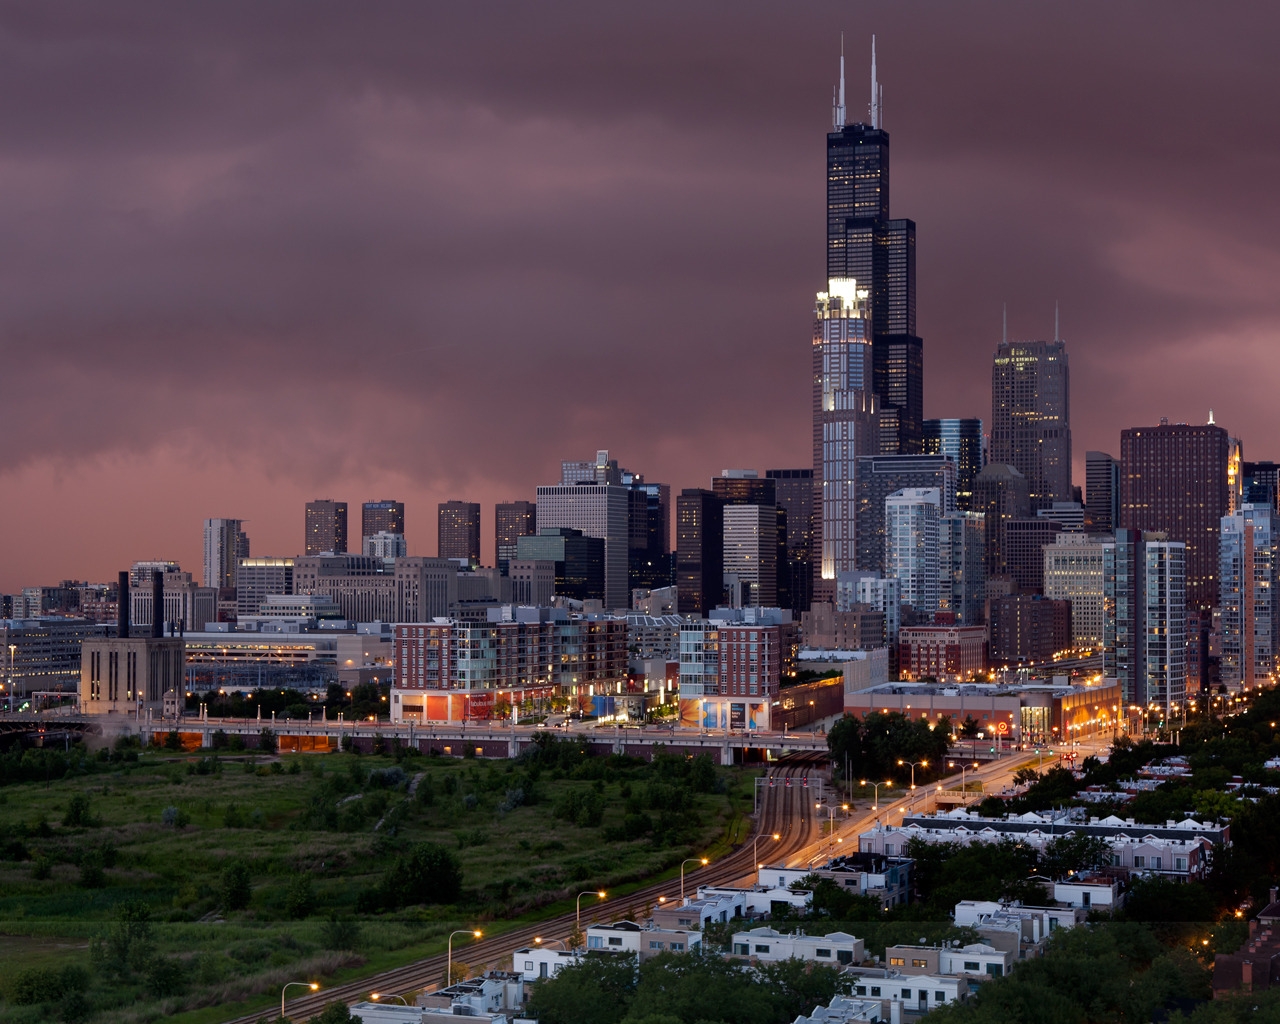 Sunset and Storm in Chicago for 1280 x 1024 resolution